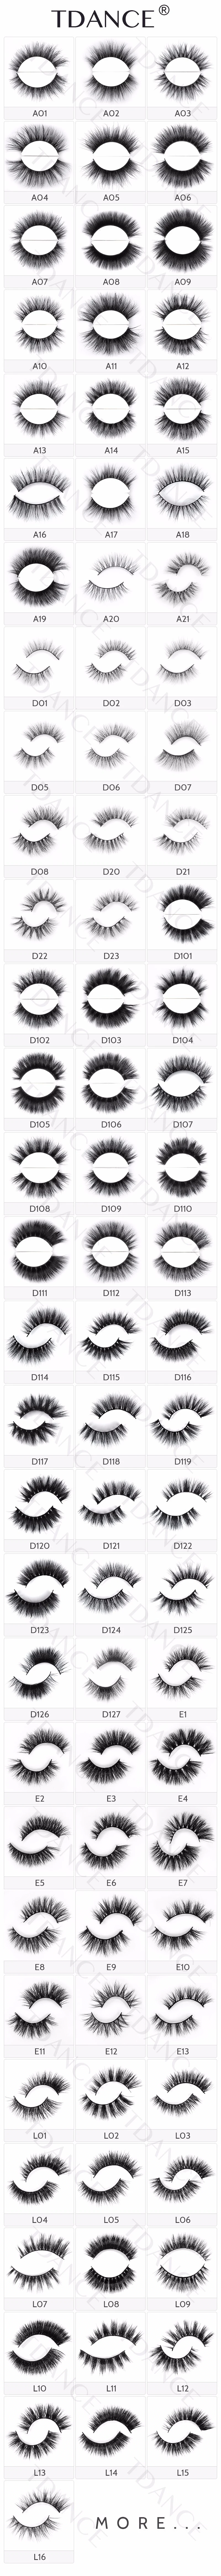 Top Quality Private Label Natural Makeup 3D Mink Eyelash Natural Makeup 3D Mink Eyelashes